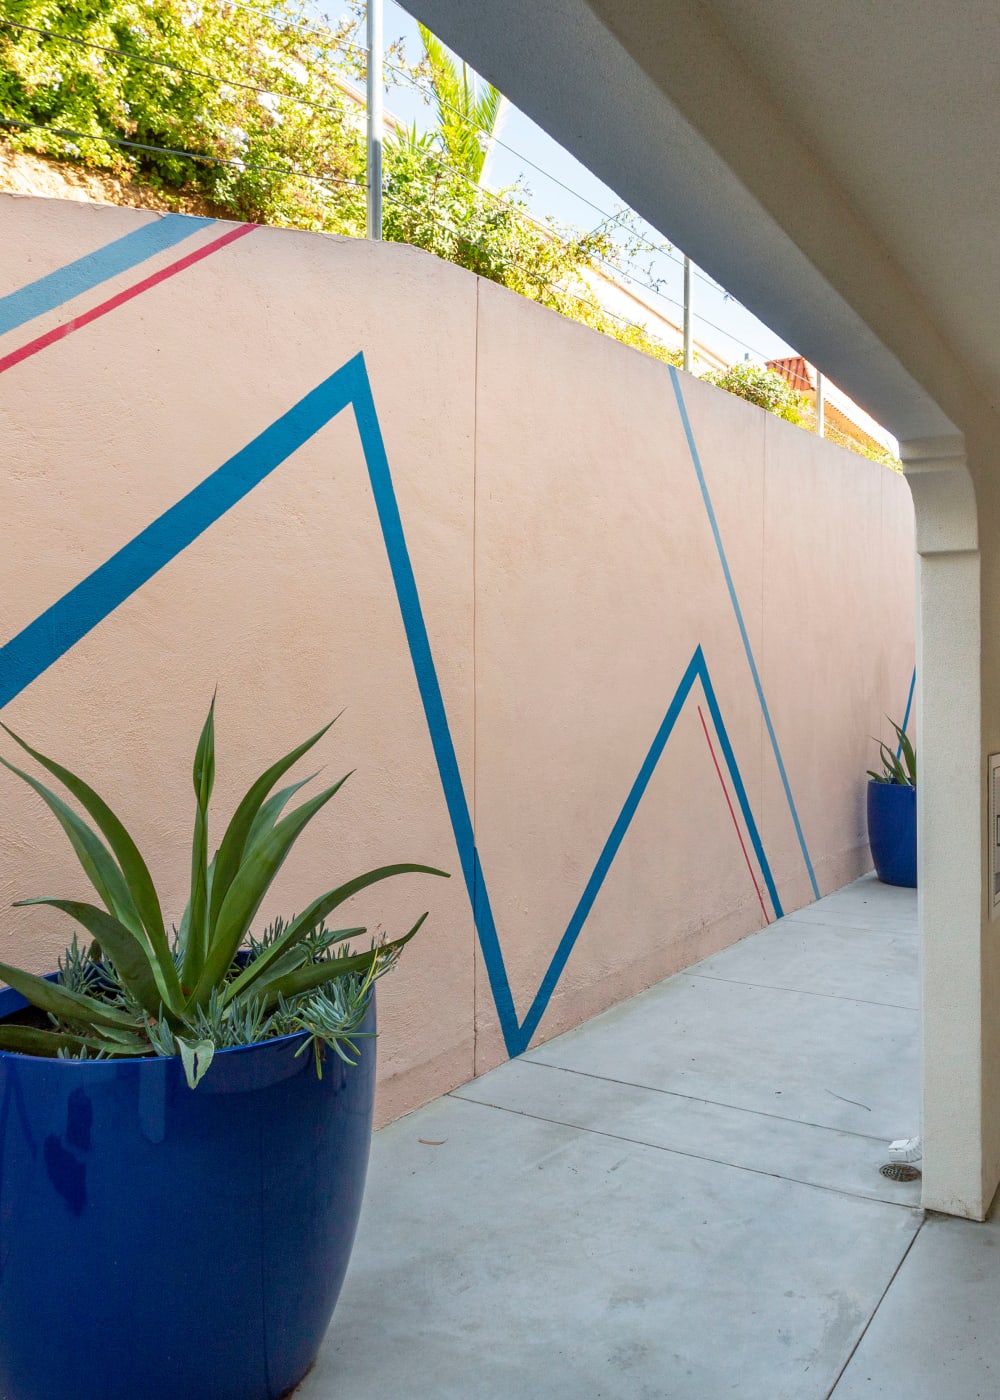 Potted plants and artistic walls at Mission West Lofts in San Diego, California